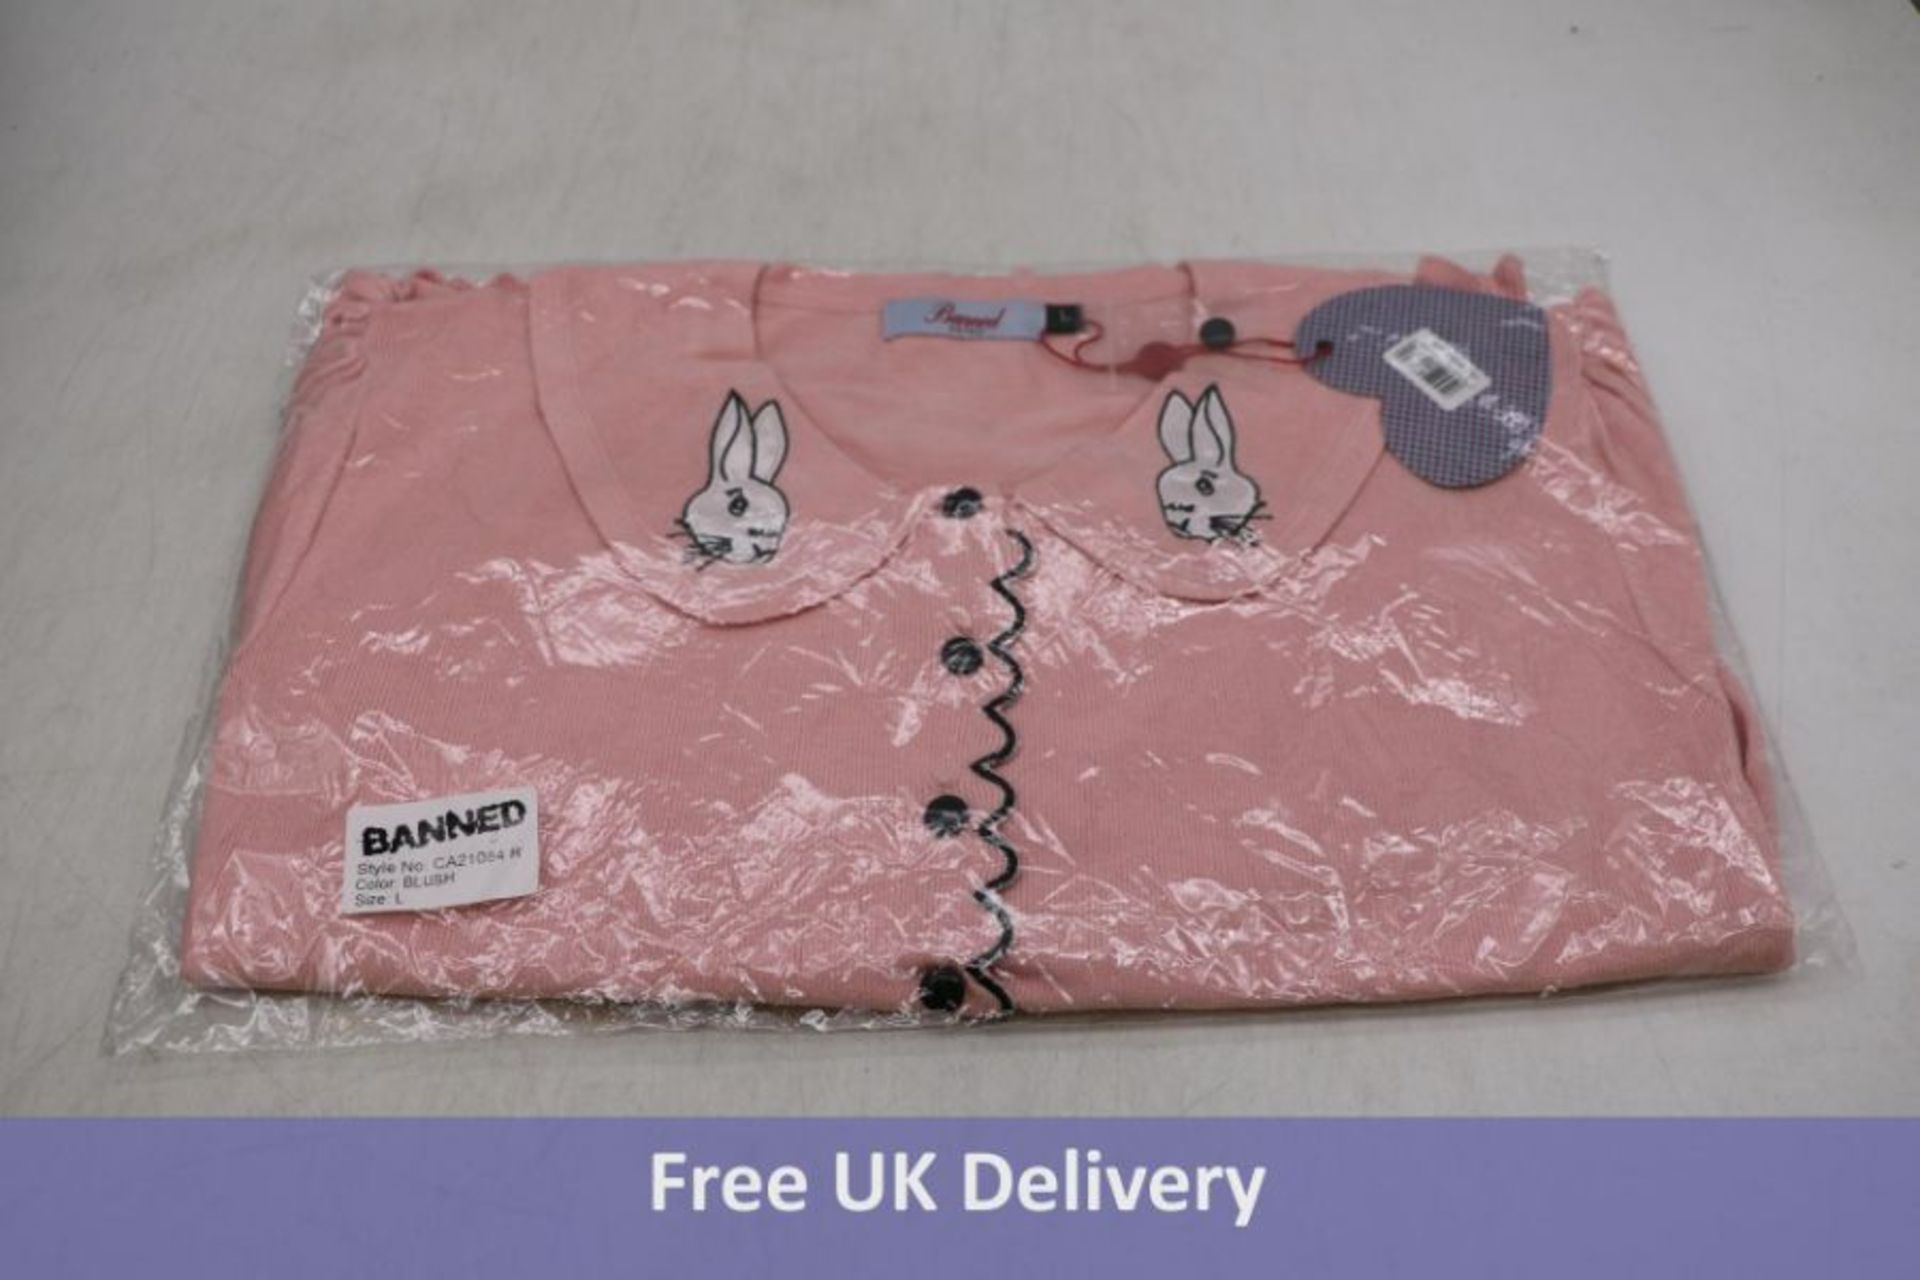 Three Banned Retro Women's 1950's Bunny Hop Dancing Days Knitted Cardigans, Pink, UK XL